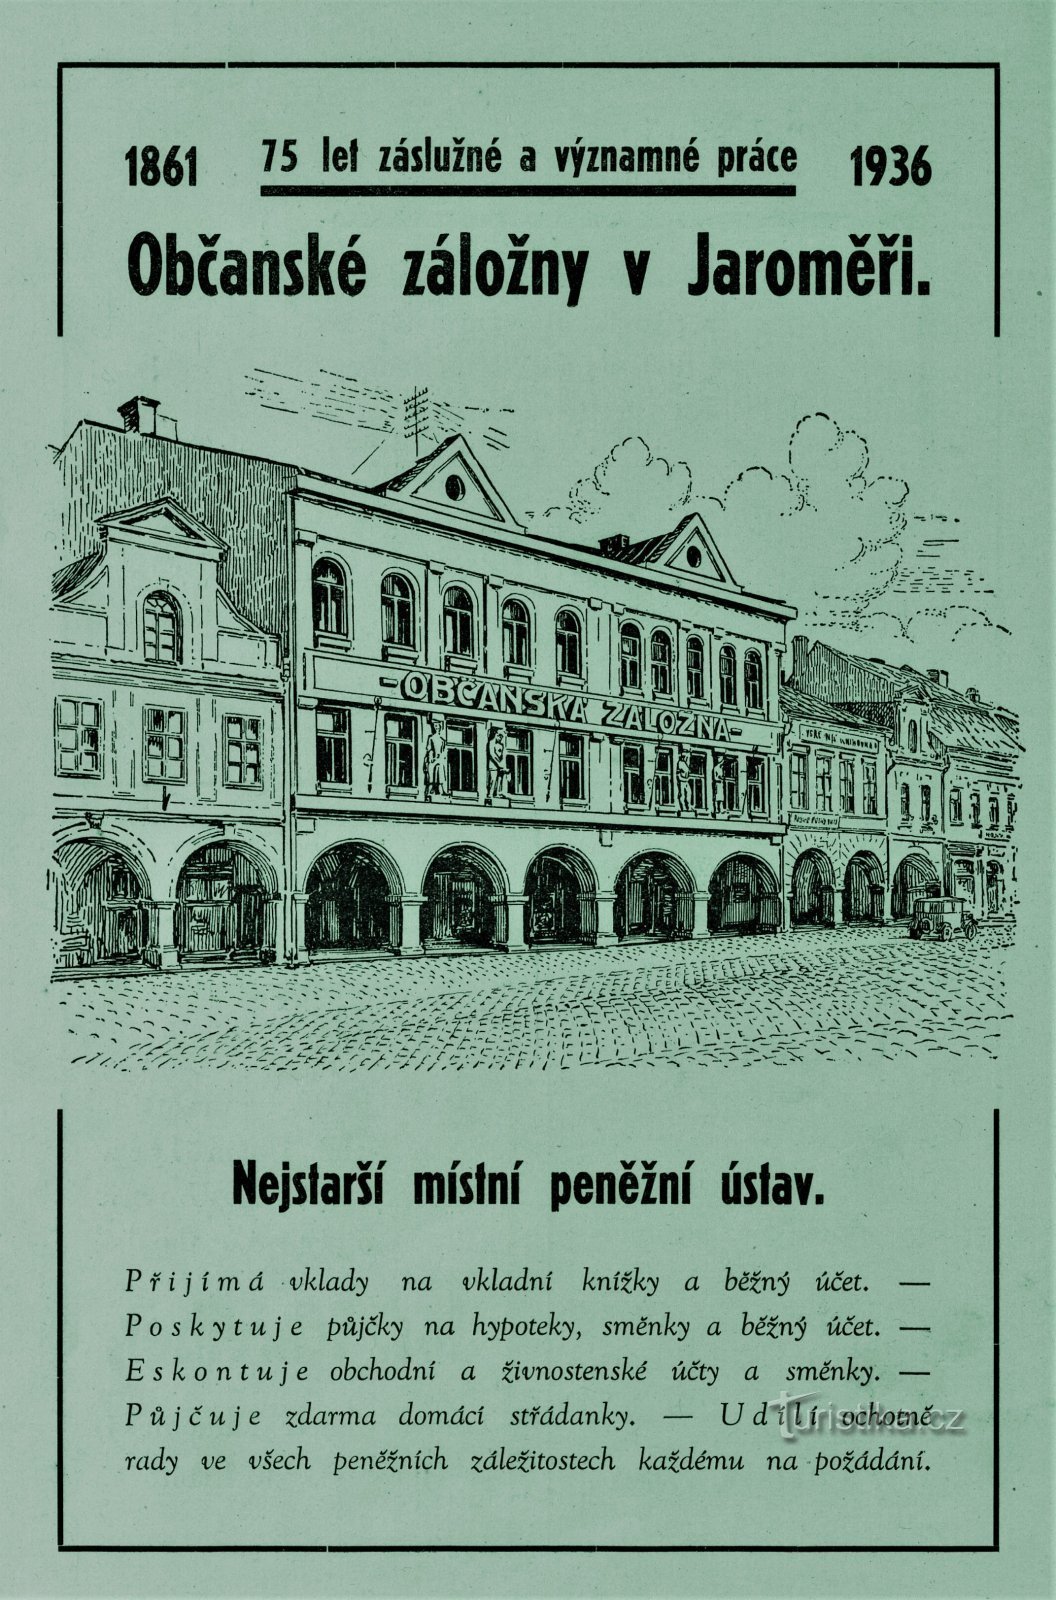 Contemporary advertisement of the Civic Savings Bank in Jaroměř from 1936